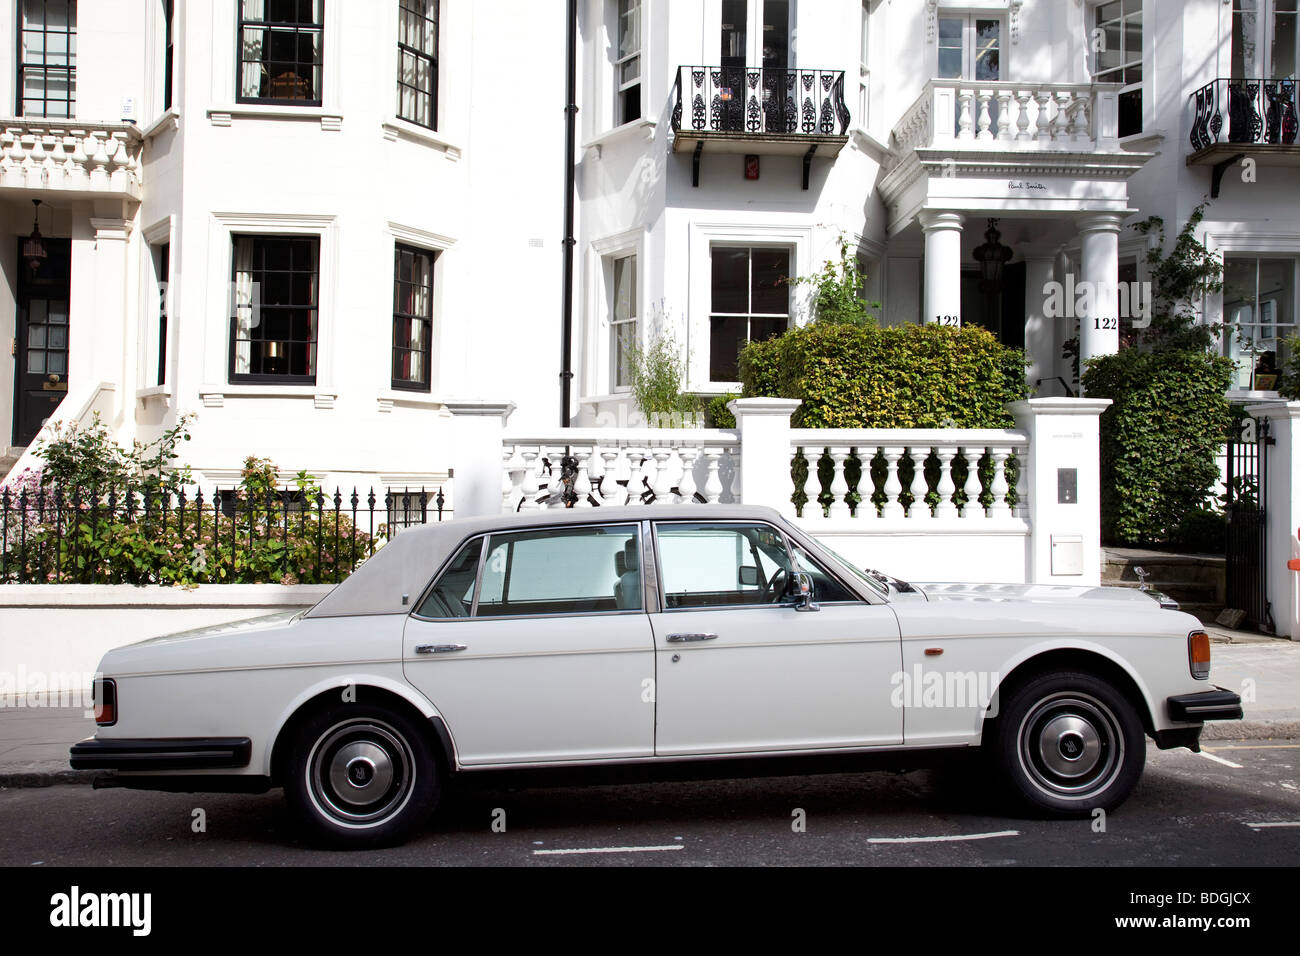 White Rolls Royce car and homes, Notting Hill, West London. Stock Photo